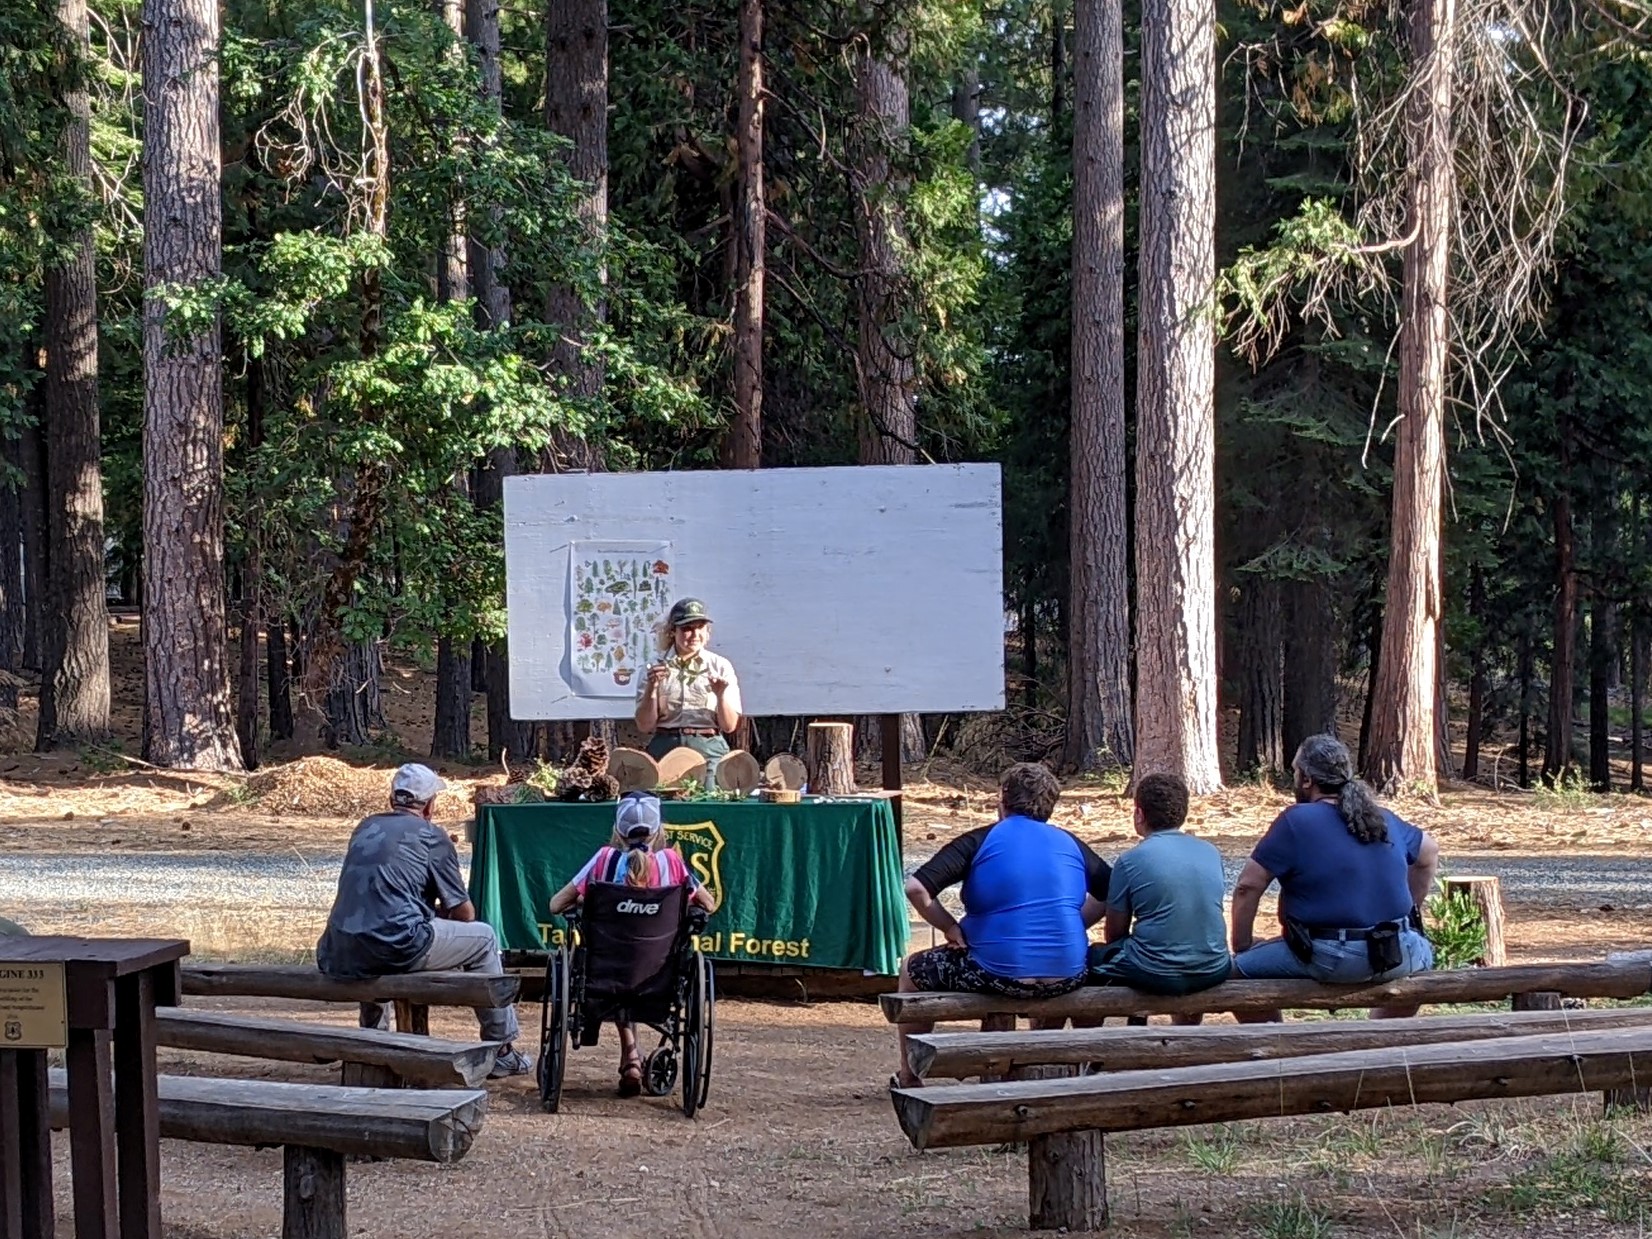 A group of people sit on benches looking toward a person presenting.